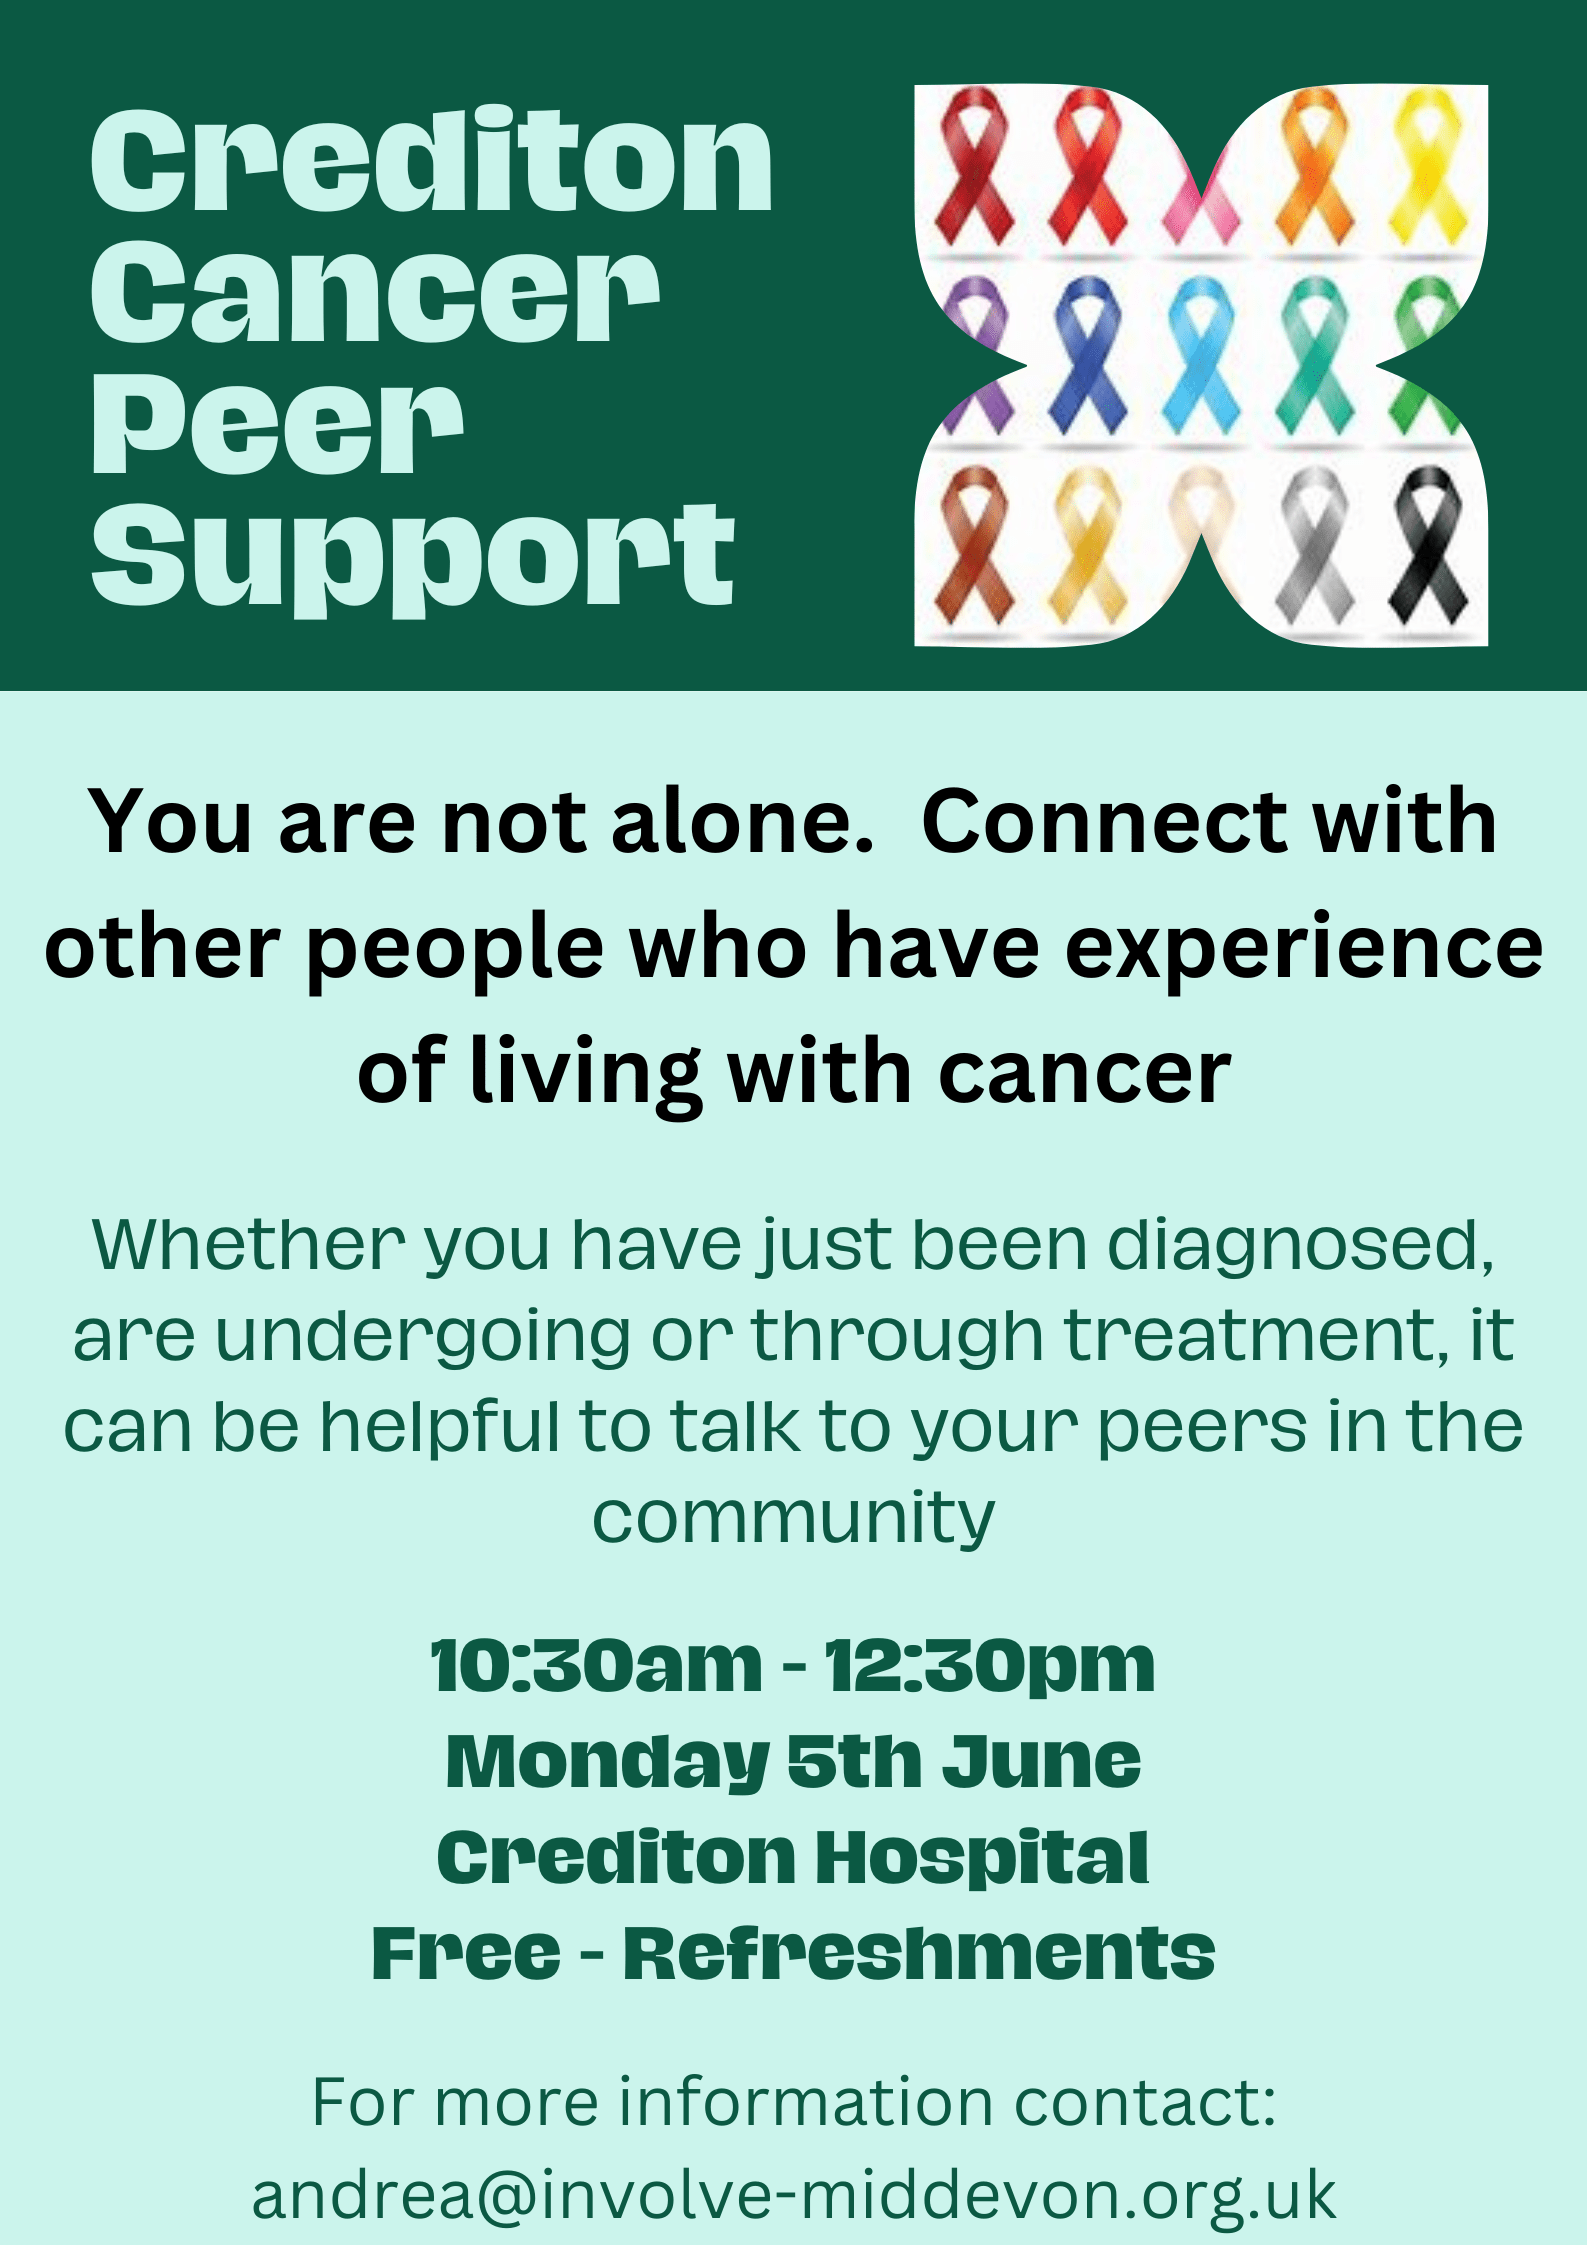 NEW: Crediton Cancer Peer Support • Involve